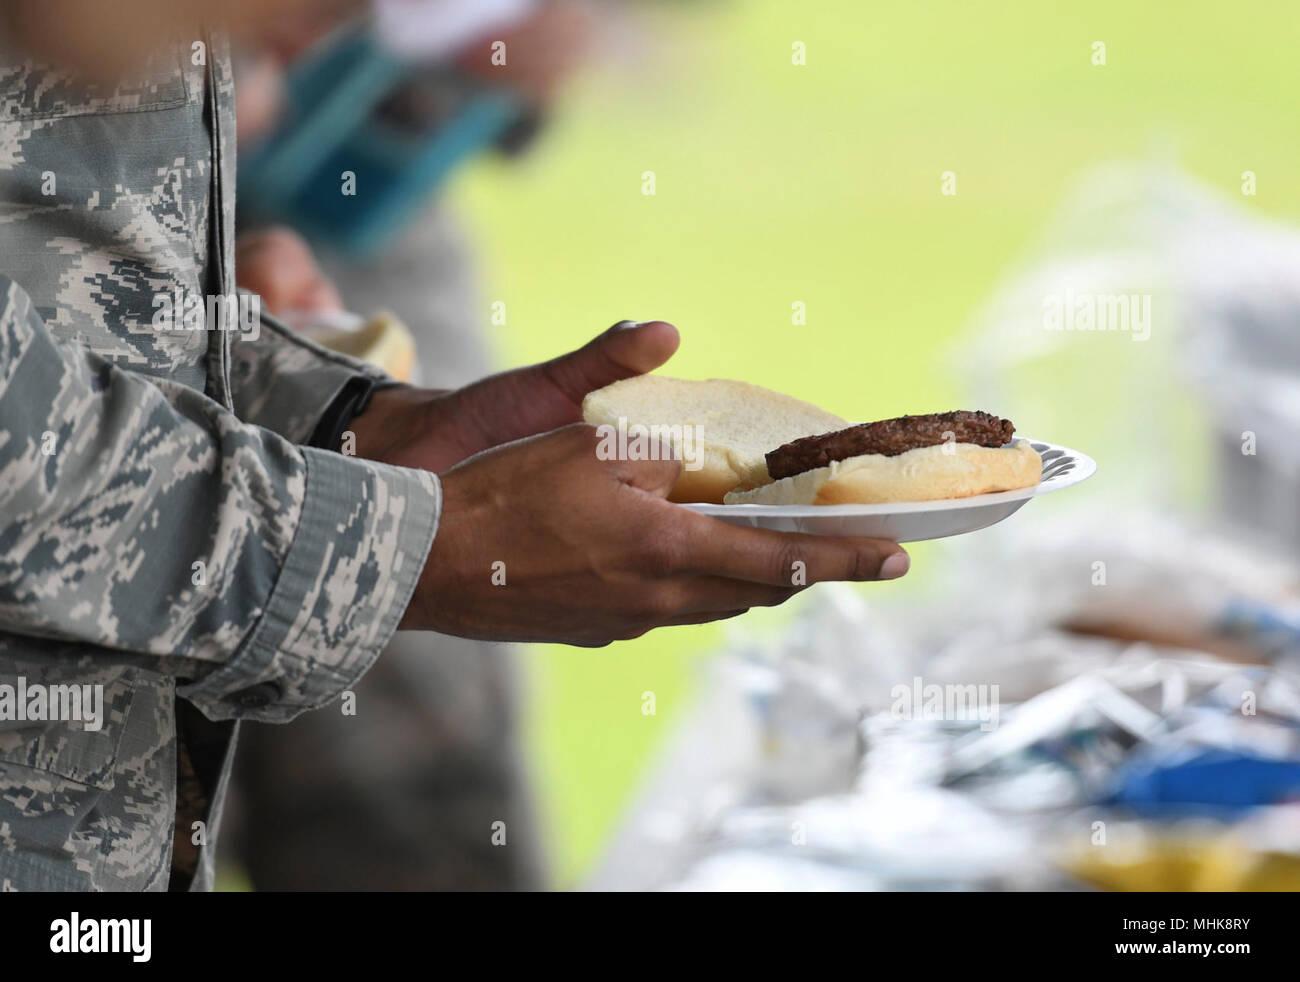 U.S. Air Force Staff Sgt. Tony Galloway, 81st Diagnostic and Therapeutics Squadron radiology technician, holds a plate of food during the Air Force Assistance Fund burger burn at the Crotwell Track March 26, 2018, on Keesler Air Force Base, Mississippi. The AFAF is an annual effort to raise funds for charitable affiliates that provide support to our Air Force family in need. (U.S. Air Force Stock Photo